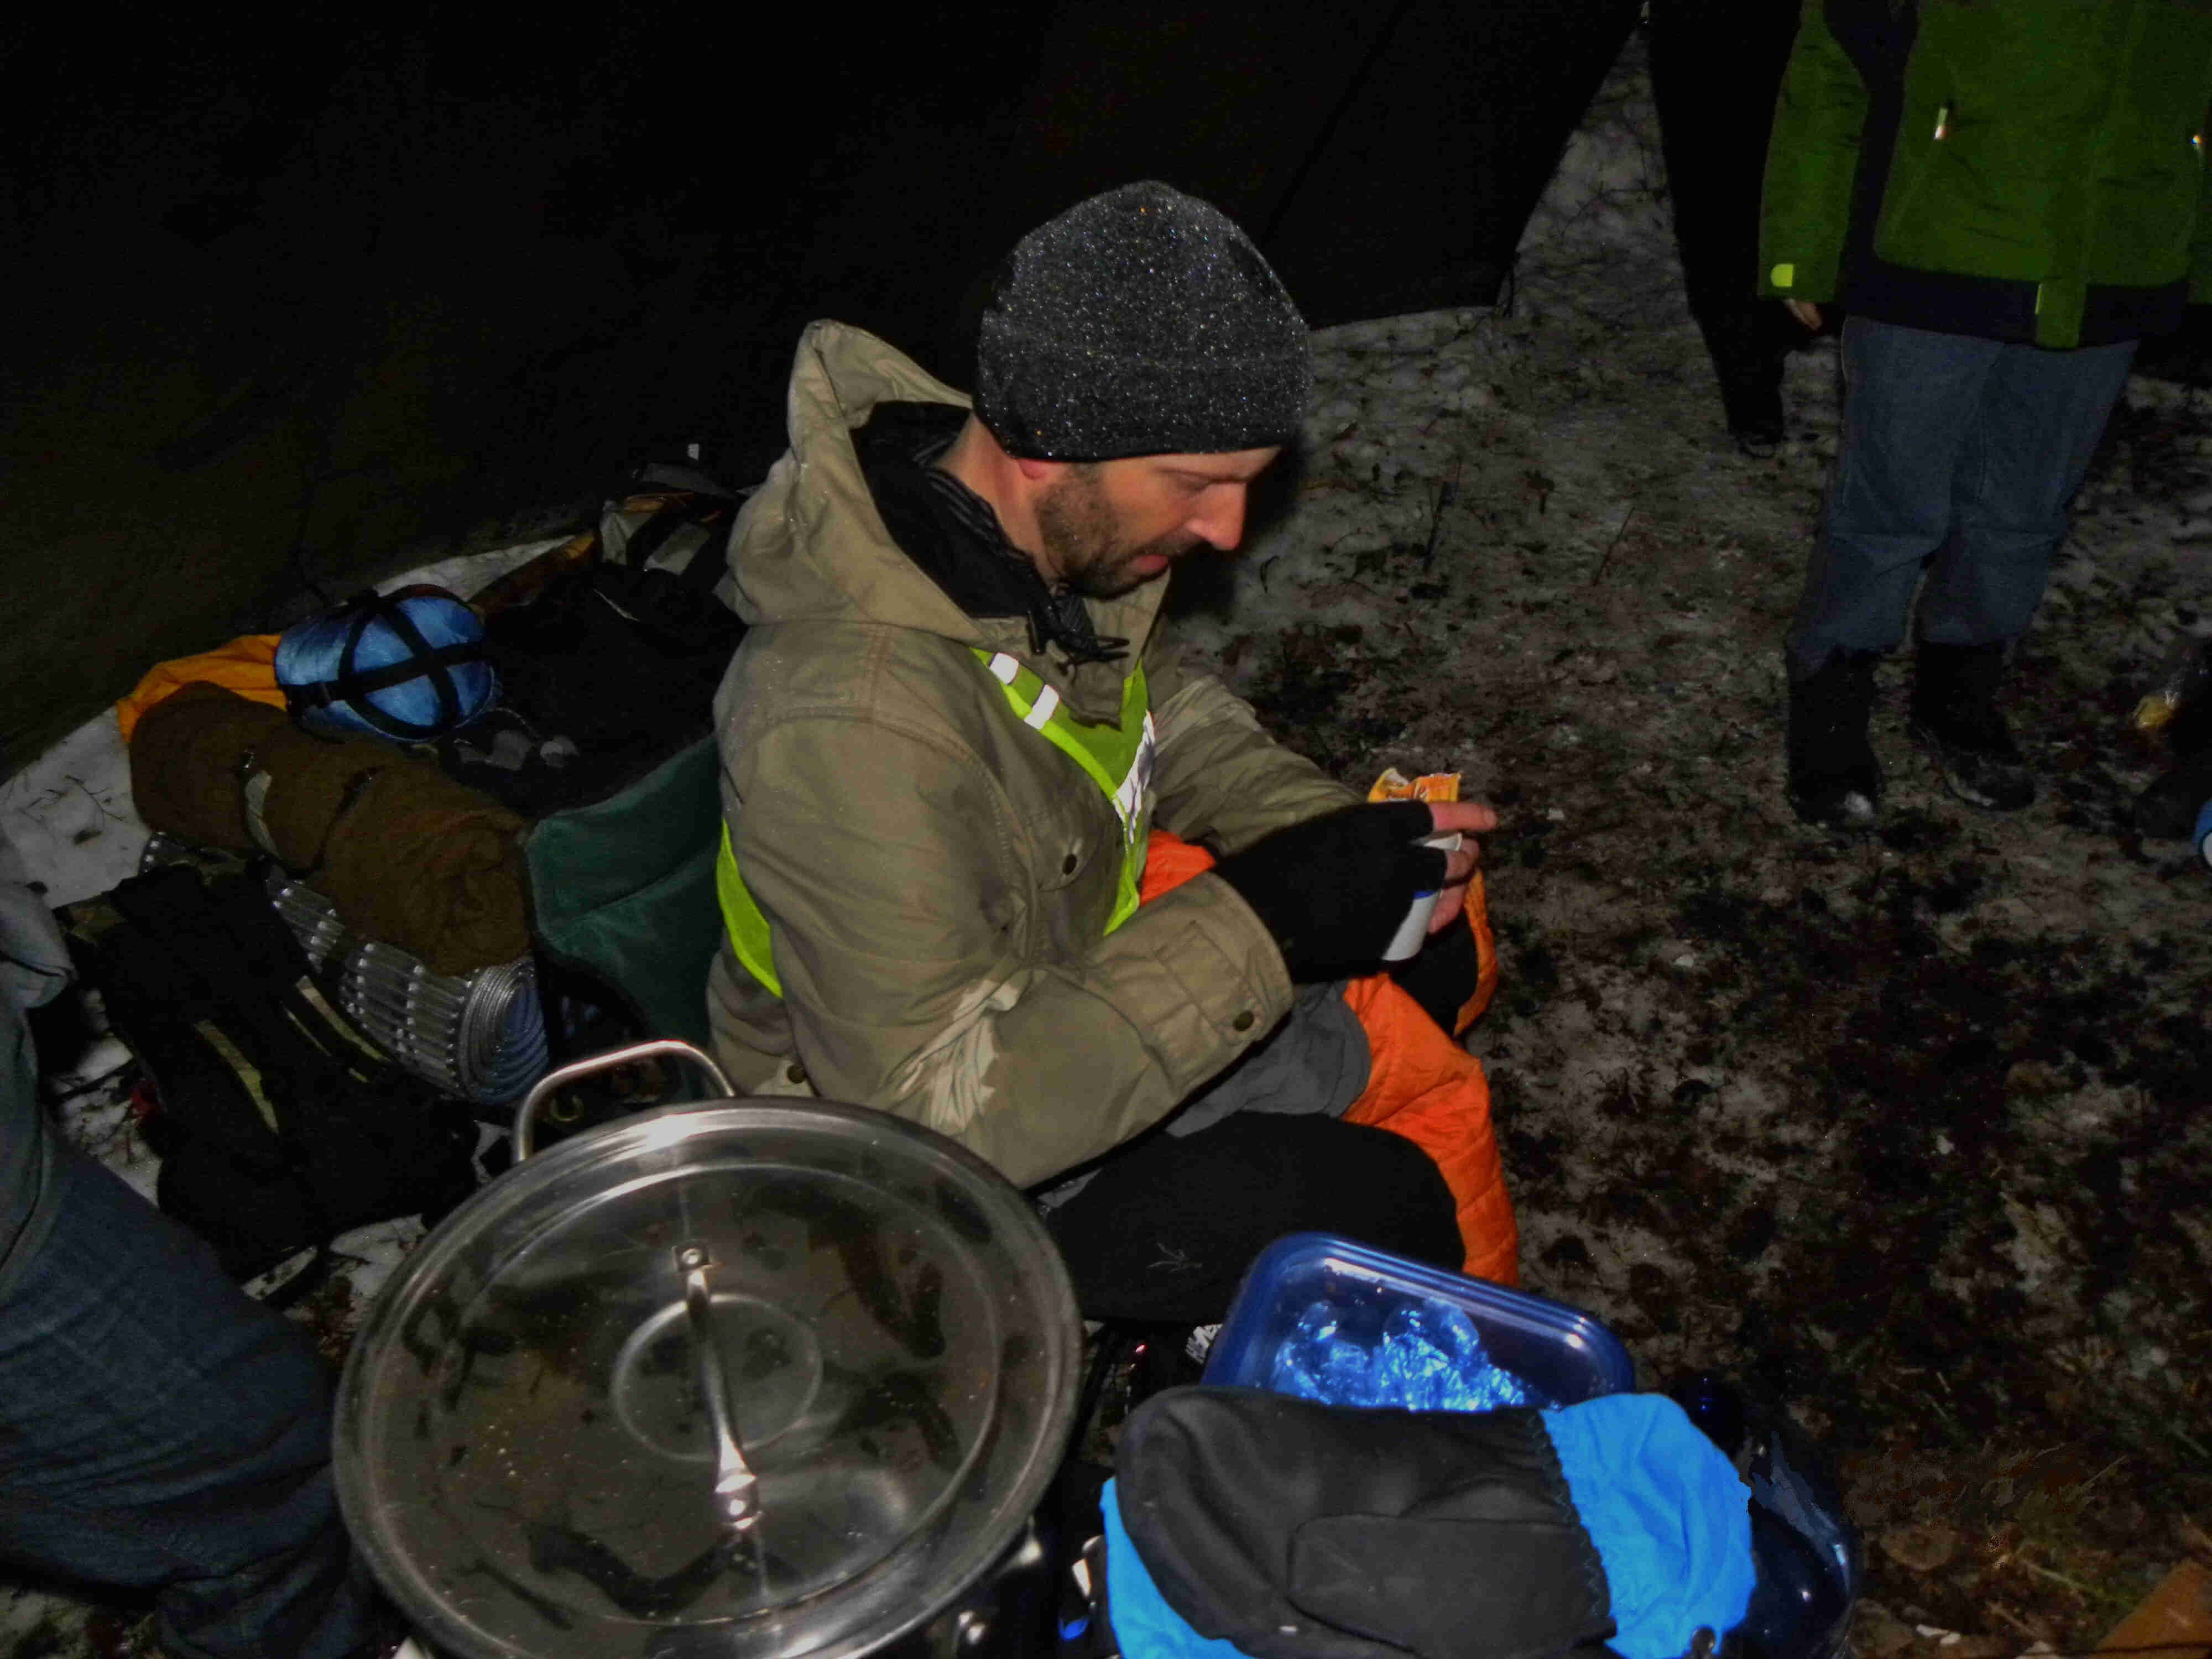 Downward view of a person, dressed in winter outerwear, sitting next to a pile of camp gear on the snowy ground at night